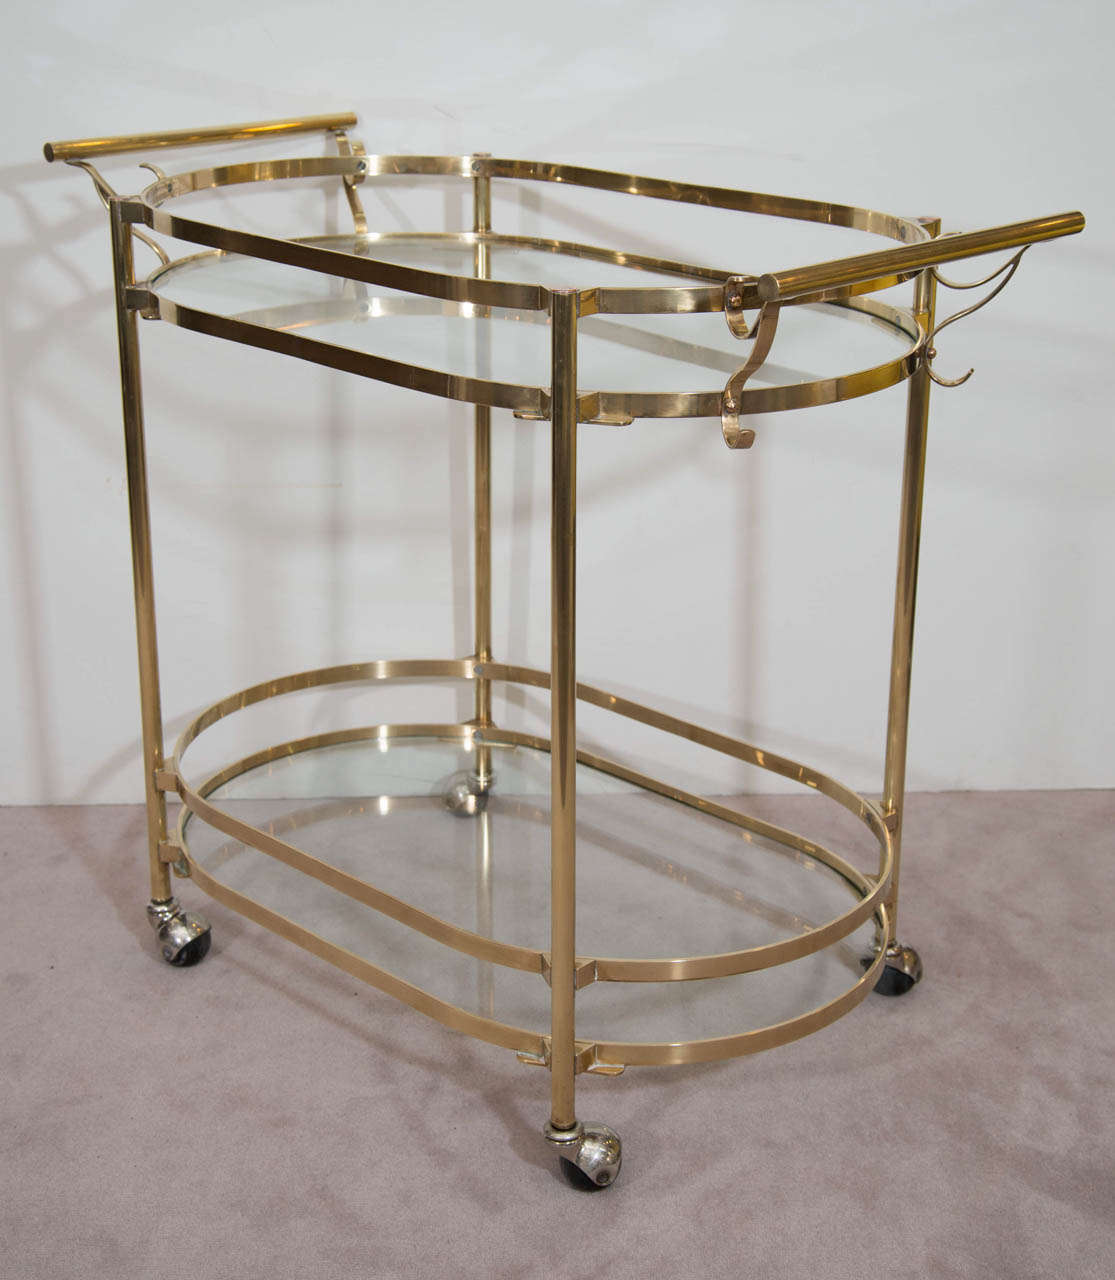 A vintage Italian double-handled brass and glass two-tier bar cart on casters.

Good vintage condition with some wear to the brass.

Reduced from: $1,850